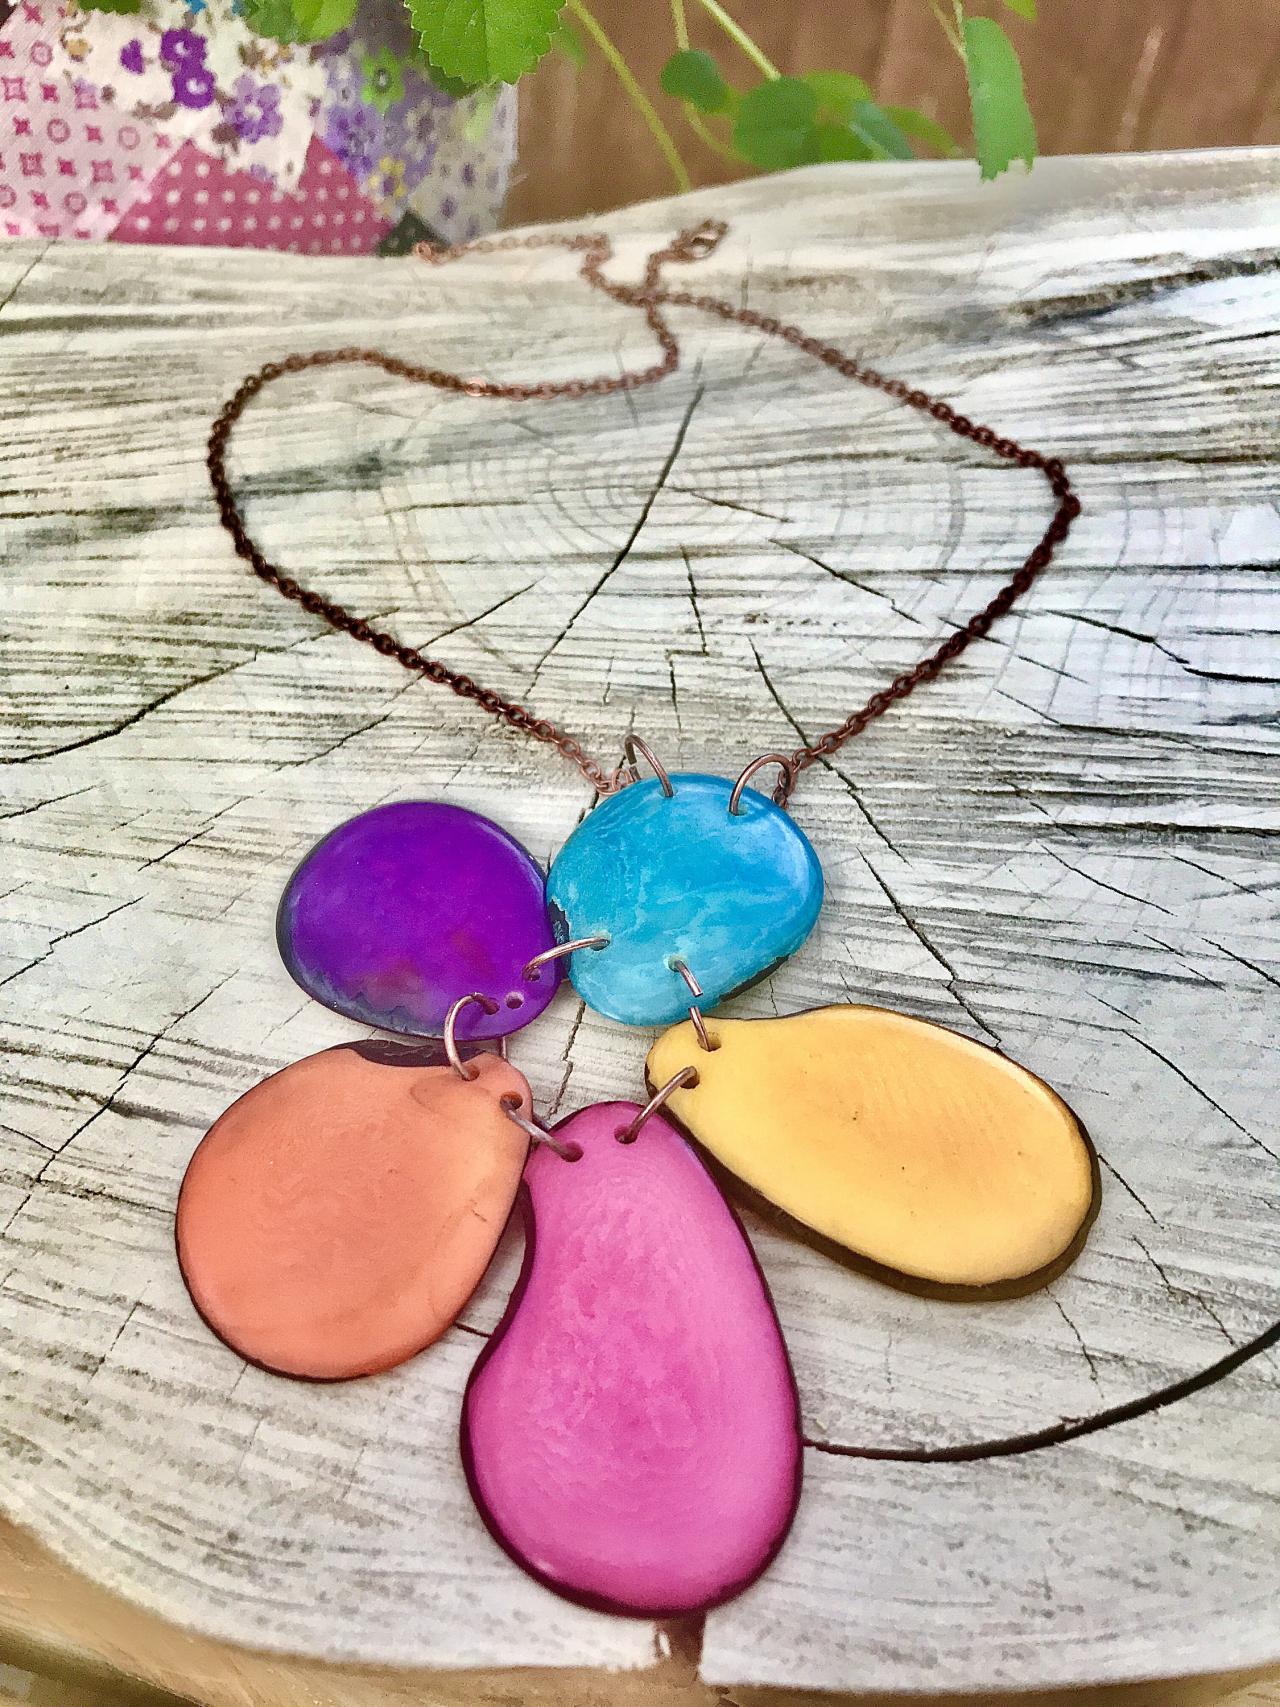 Boho Colourful Tagua Nut Necklace With Copper Chain.